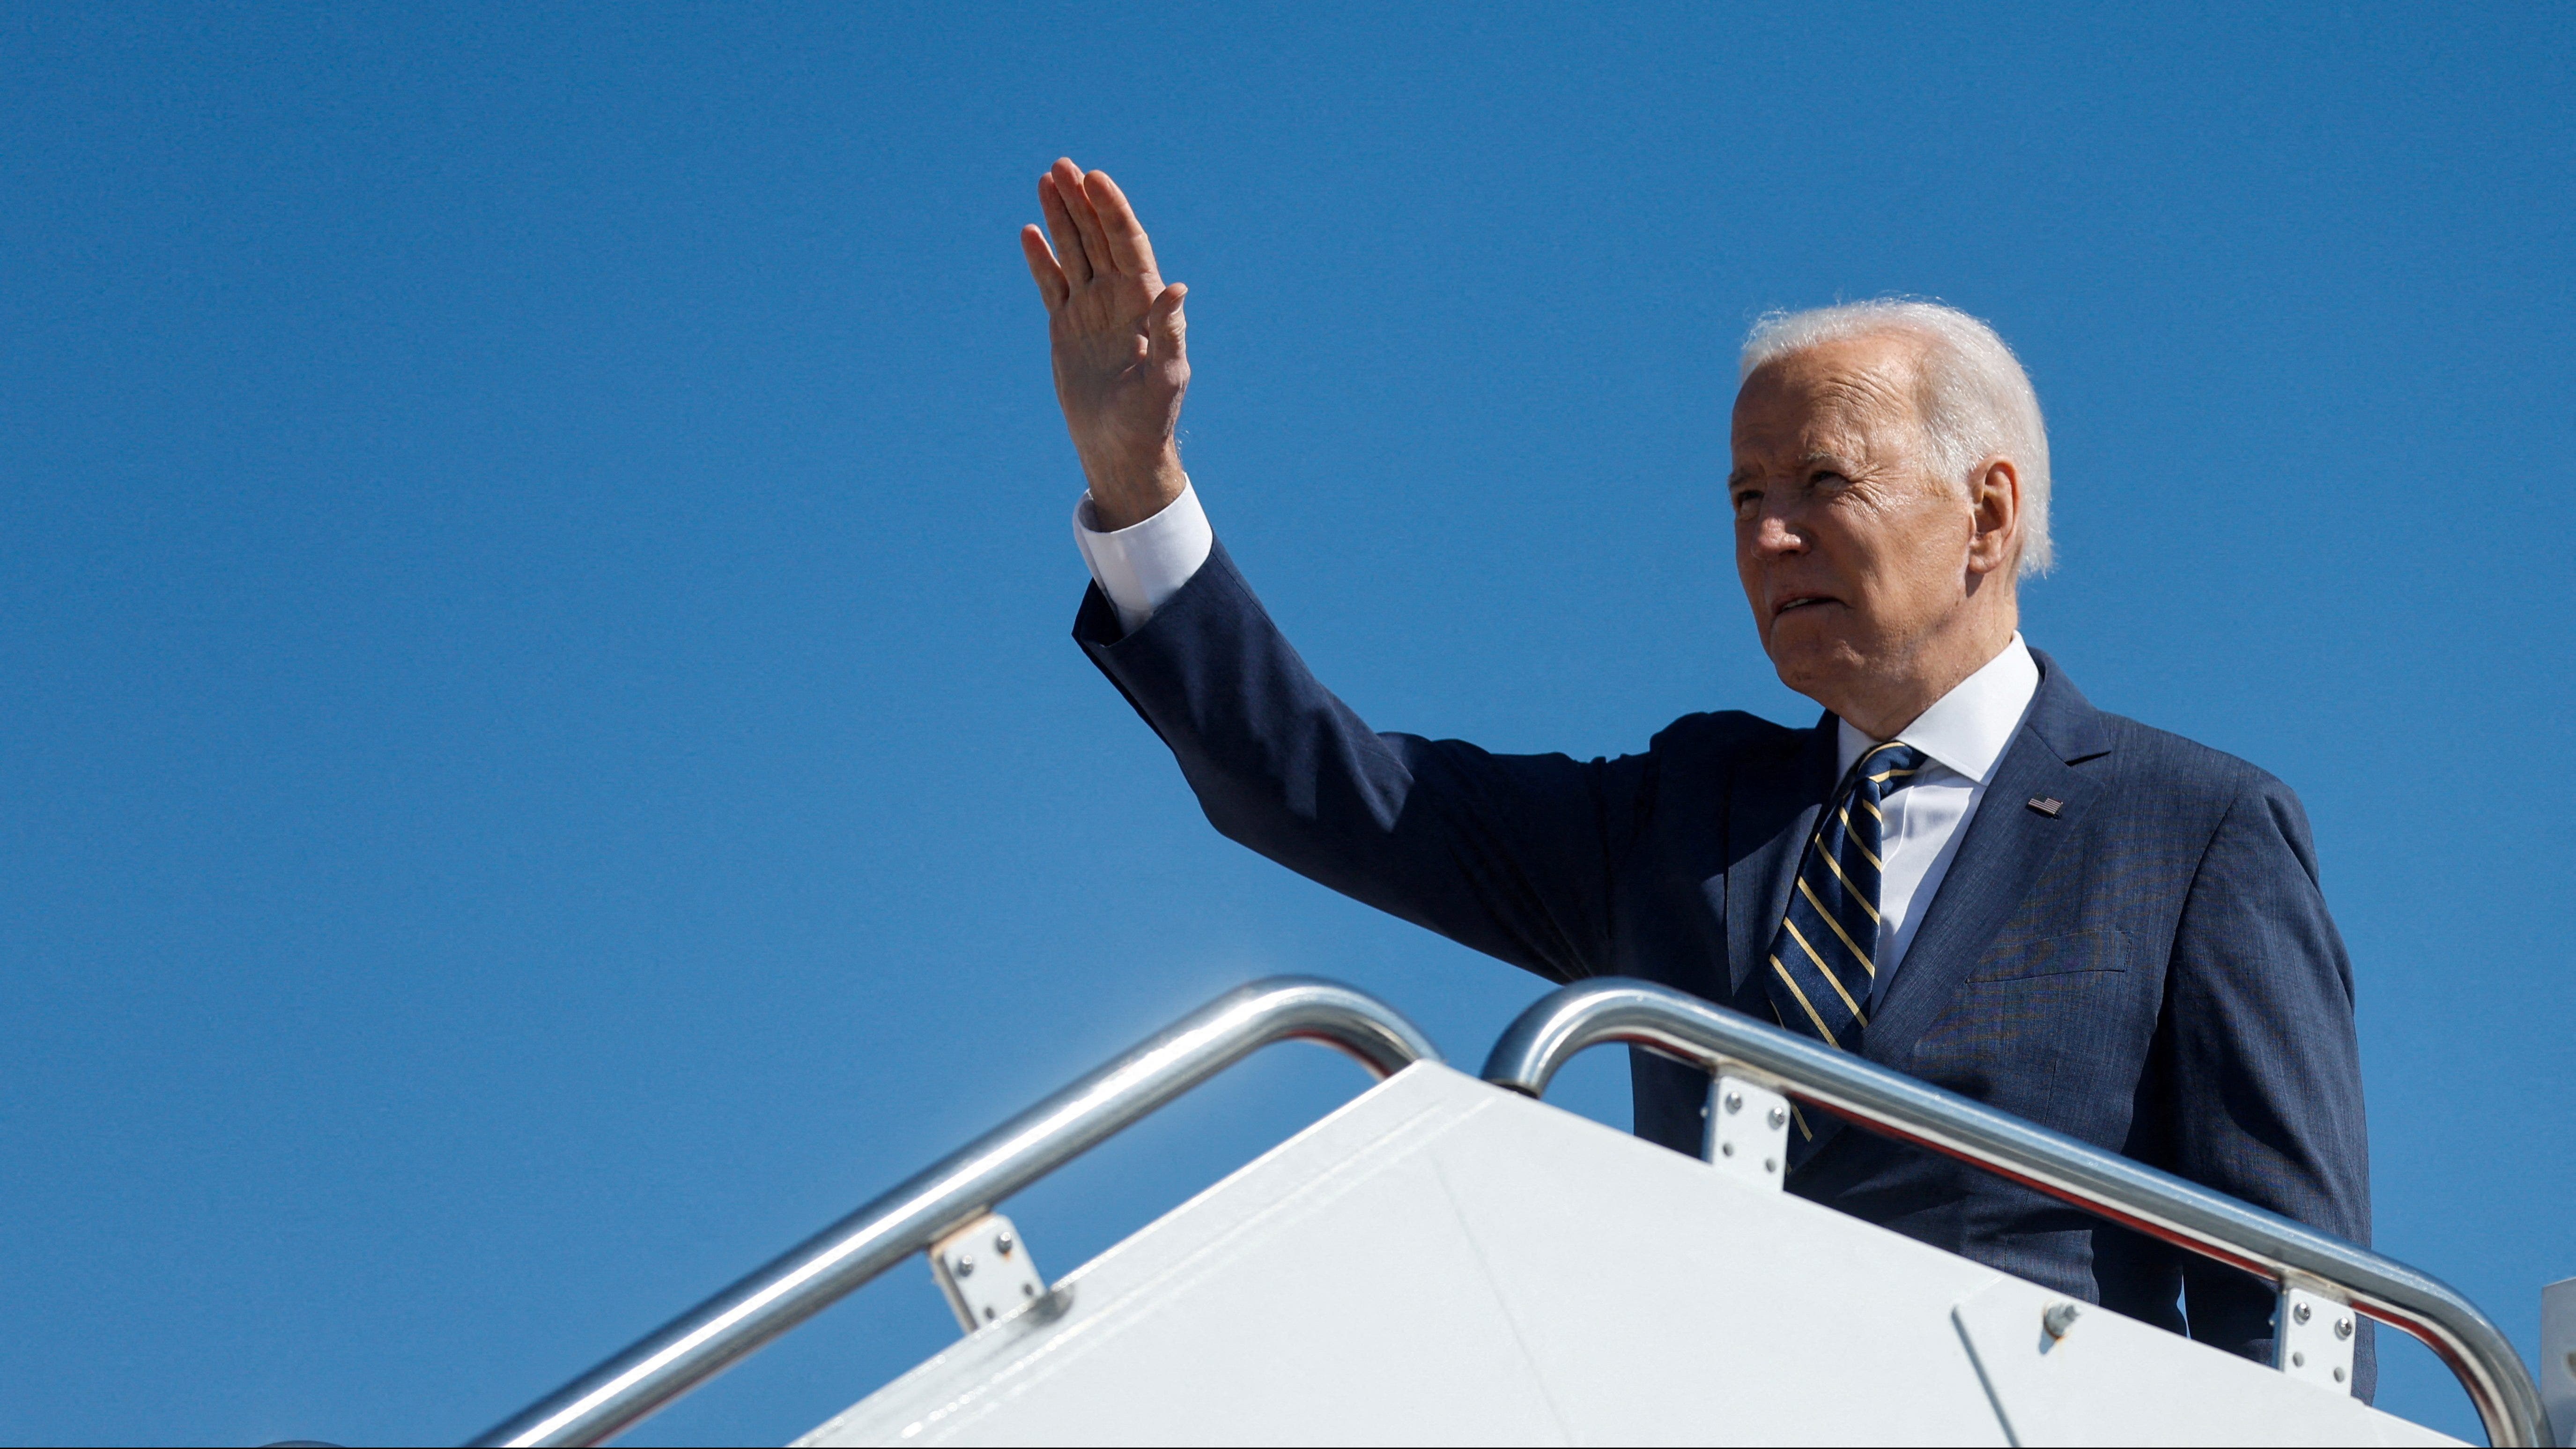 Biden's 2024 intentions don't stop potential Democratic contenders from raising their national profiles